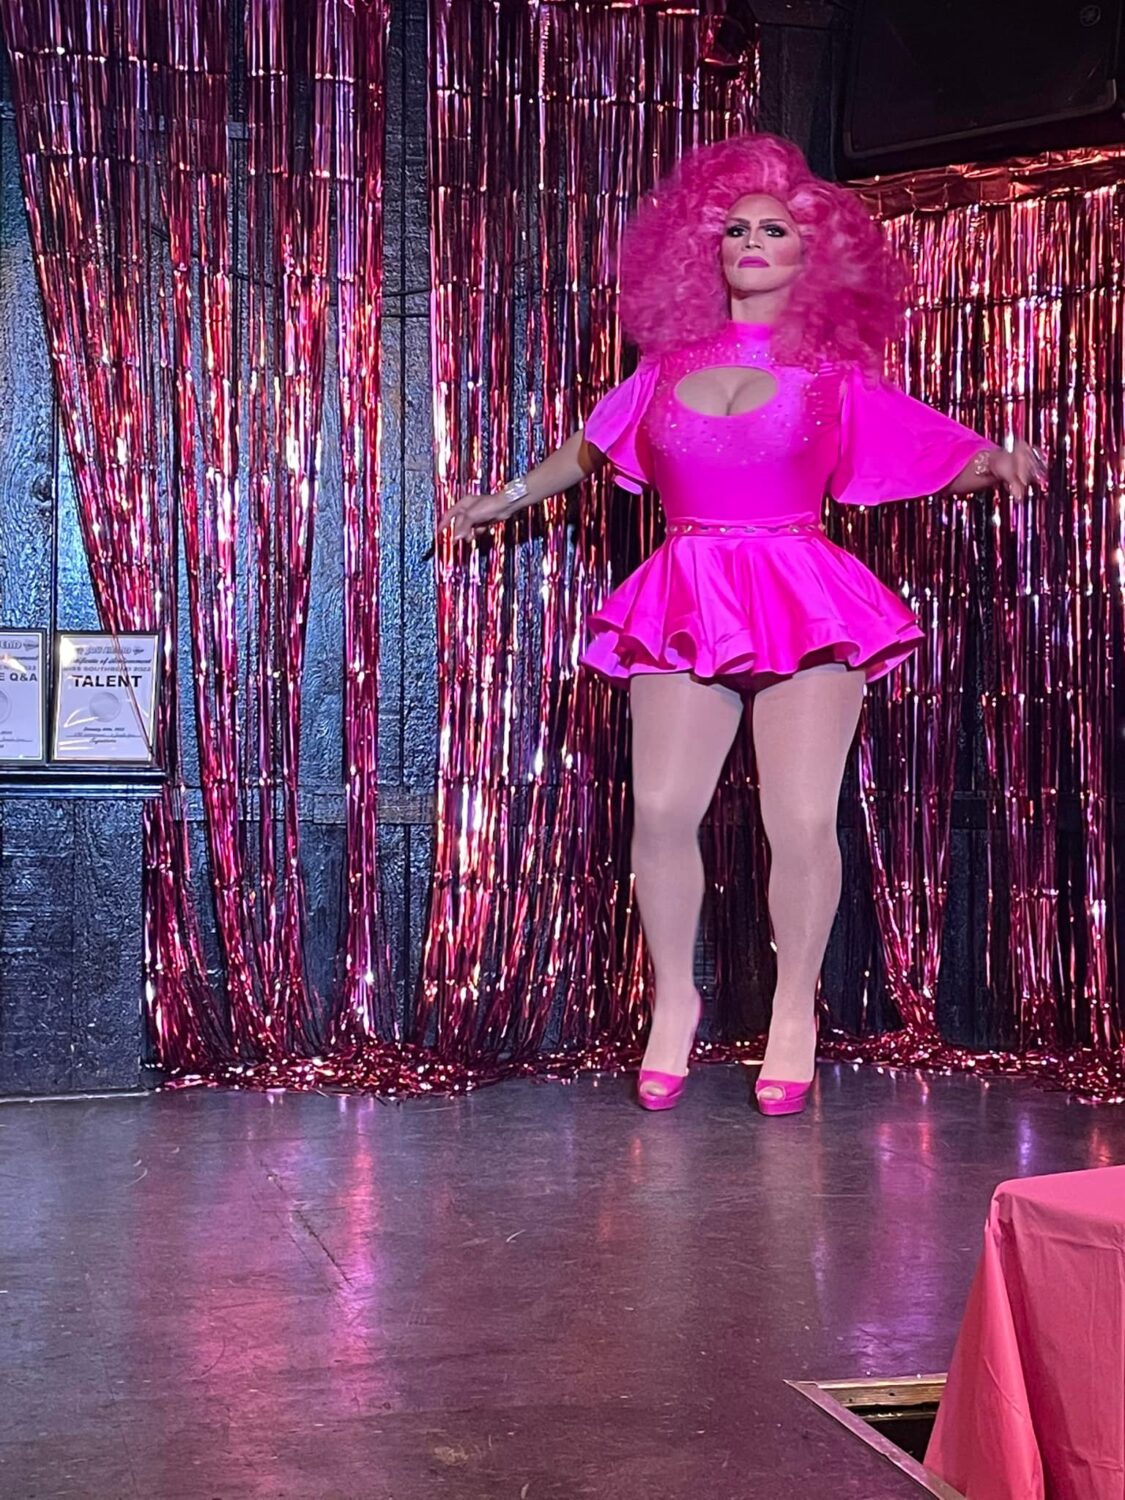 Ava Aurora Foxx | Miss Southbend Pageant | Southbend Tavern (Columbus, Ohio) | 1/30/2022 [Photo by Vintage Blue]